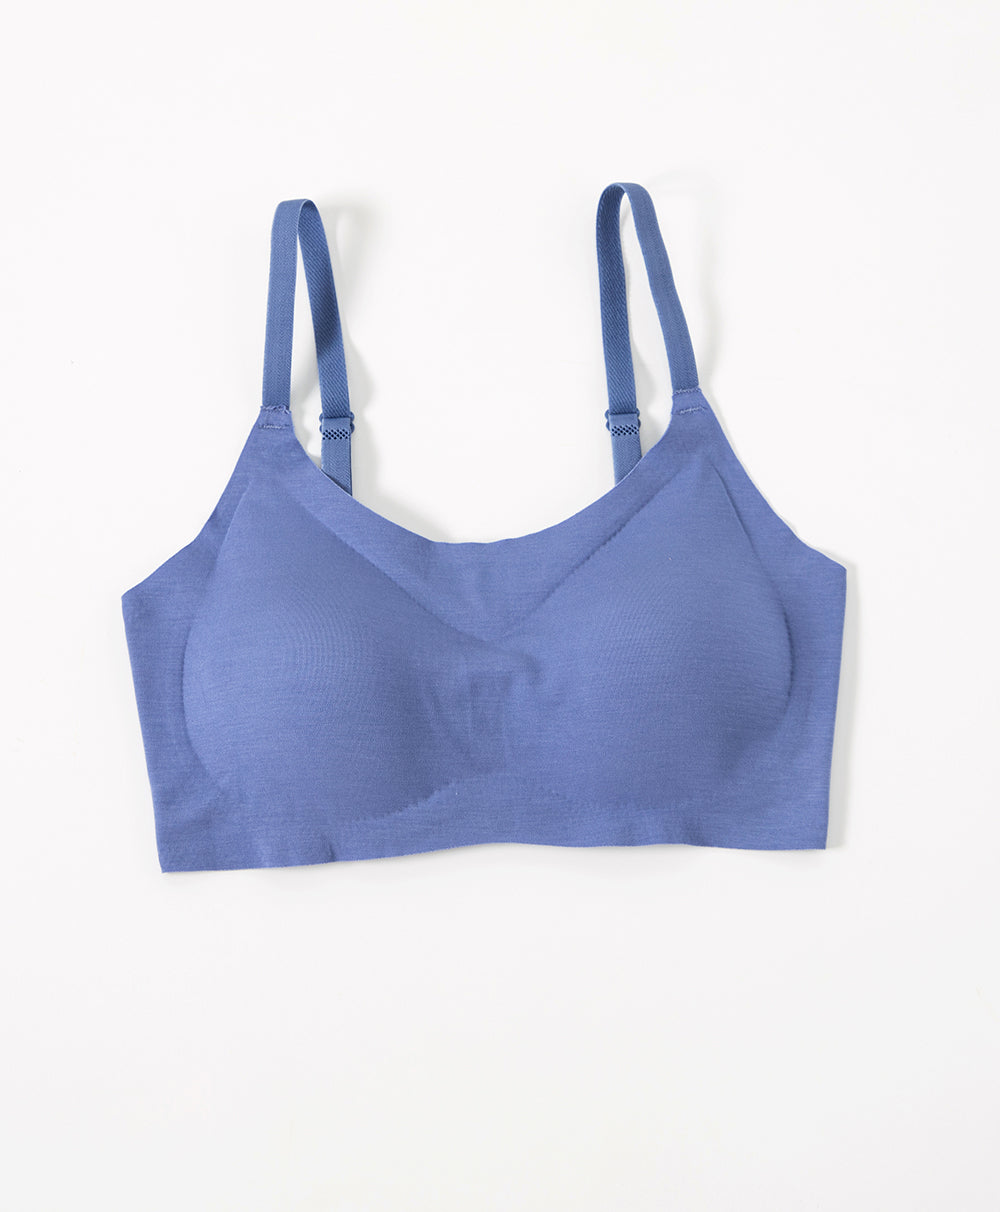 Real Comfy Triangle Seamless Wireless Bra – Young Hearts Sdn Bhd(706738-P)